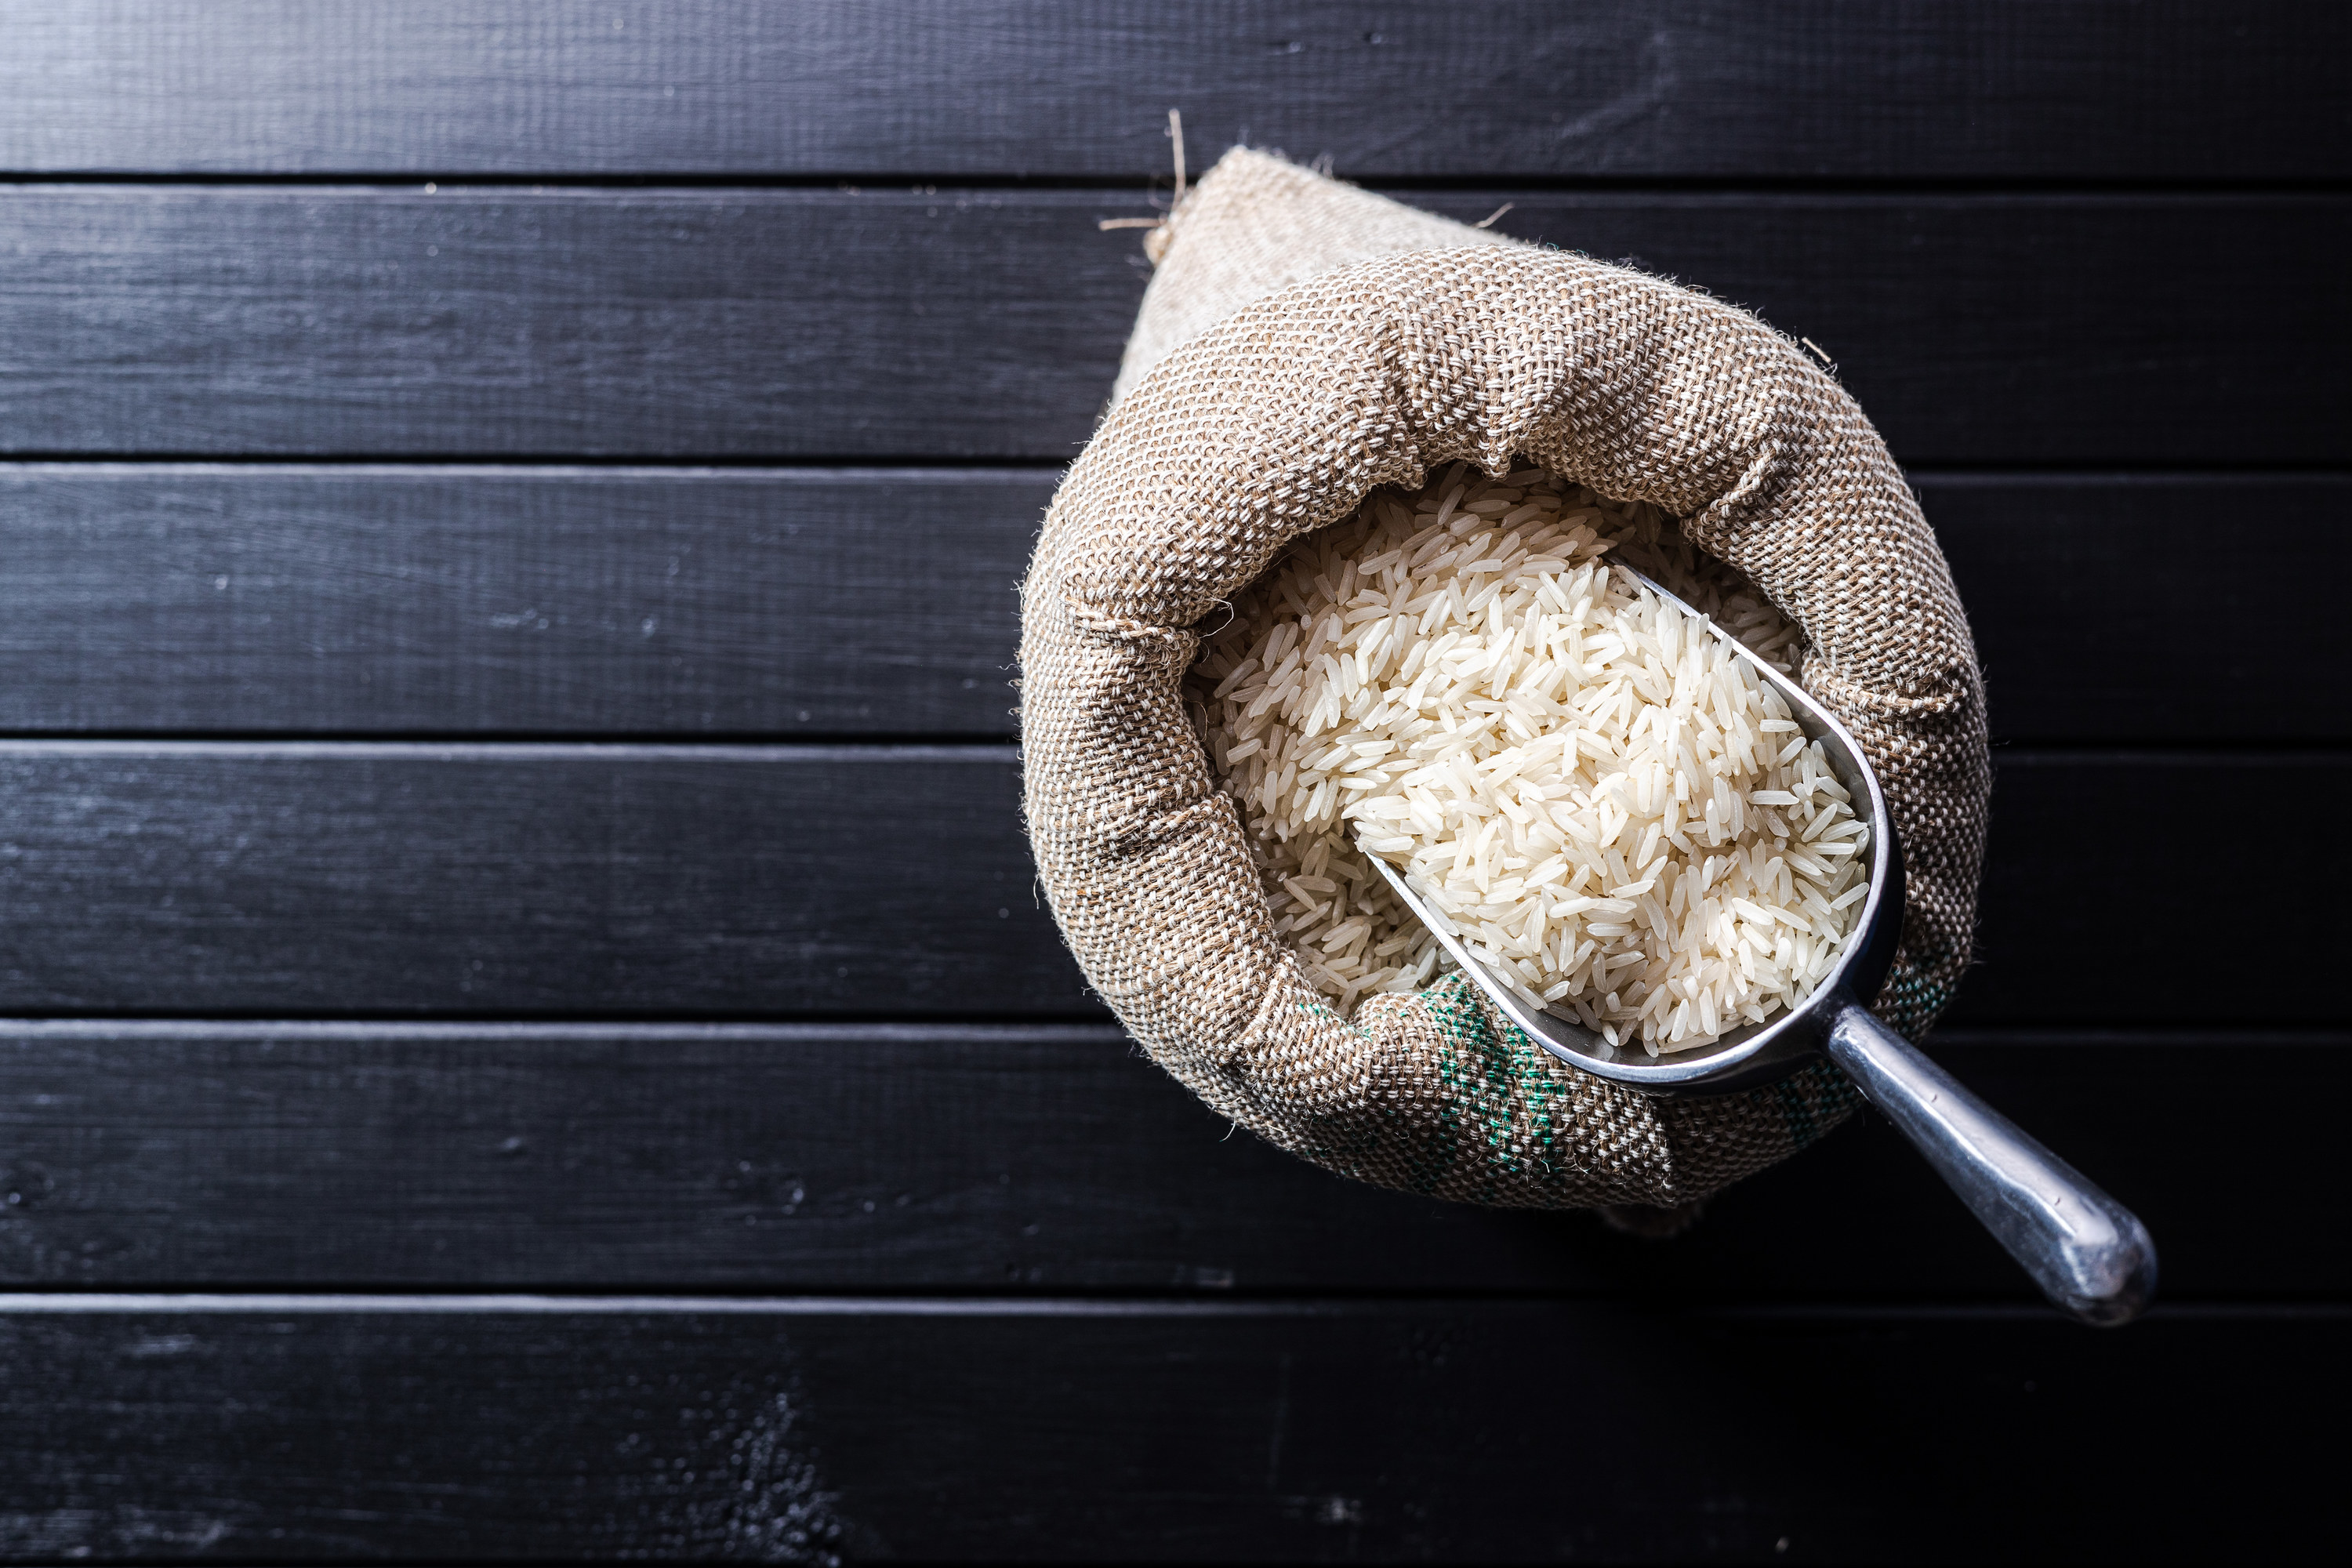 Uncooked white rice in a burlap sack on black table